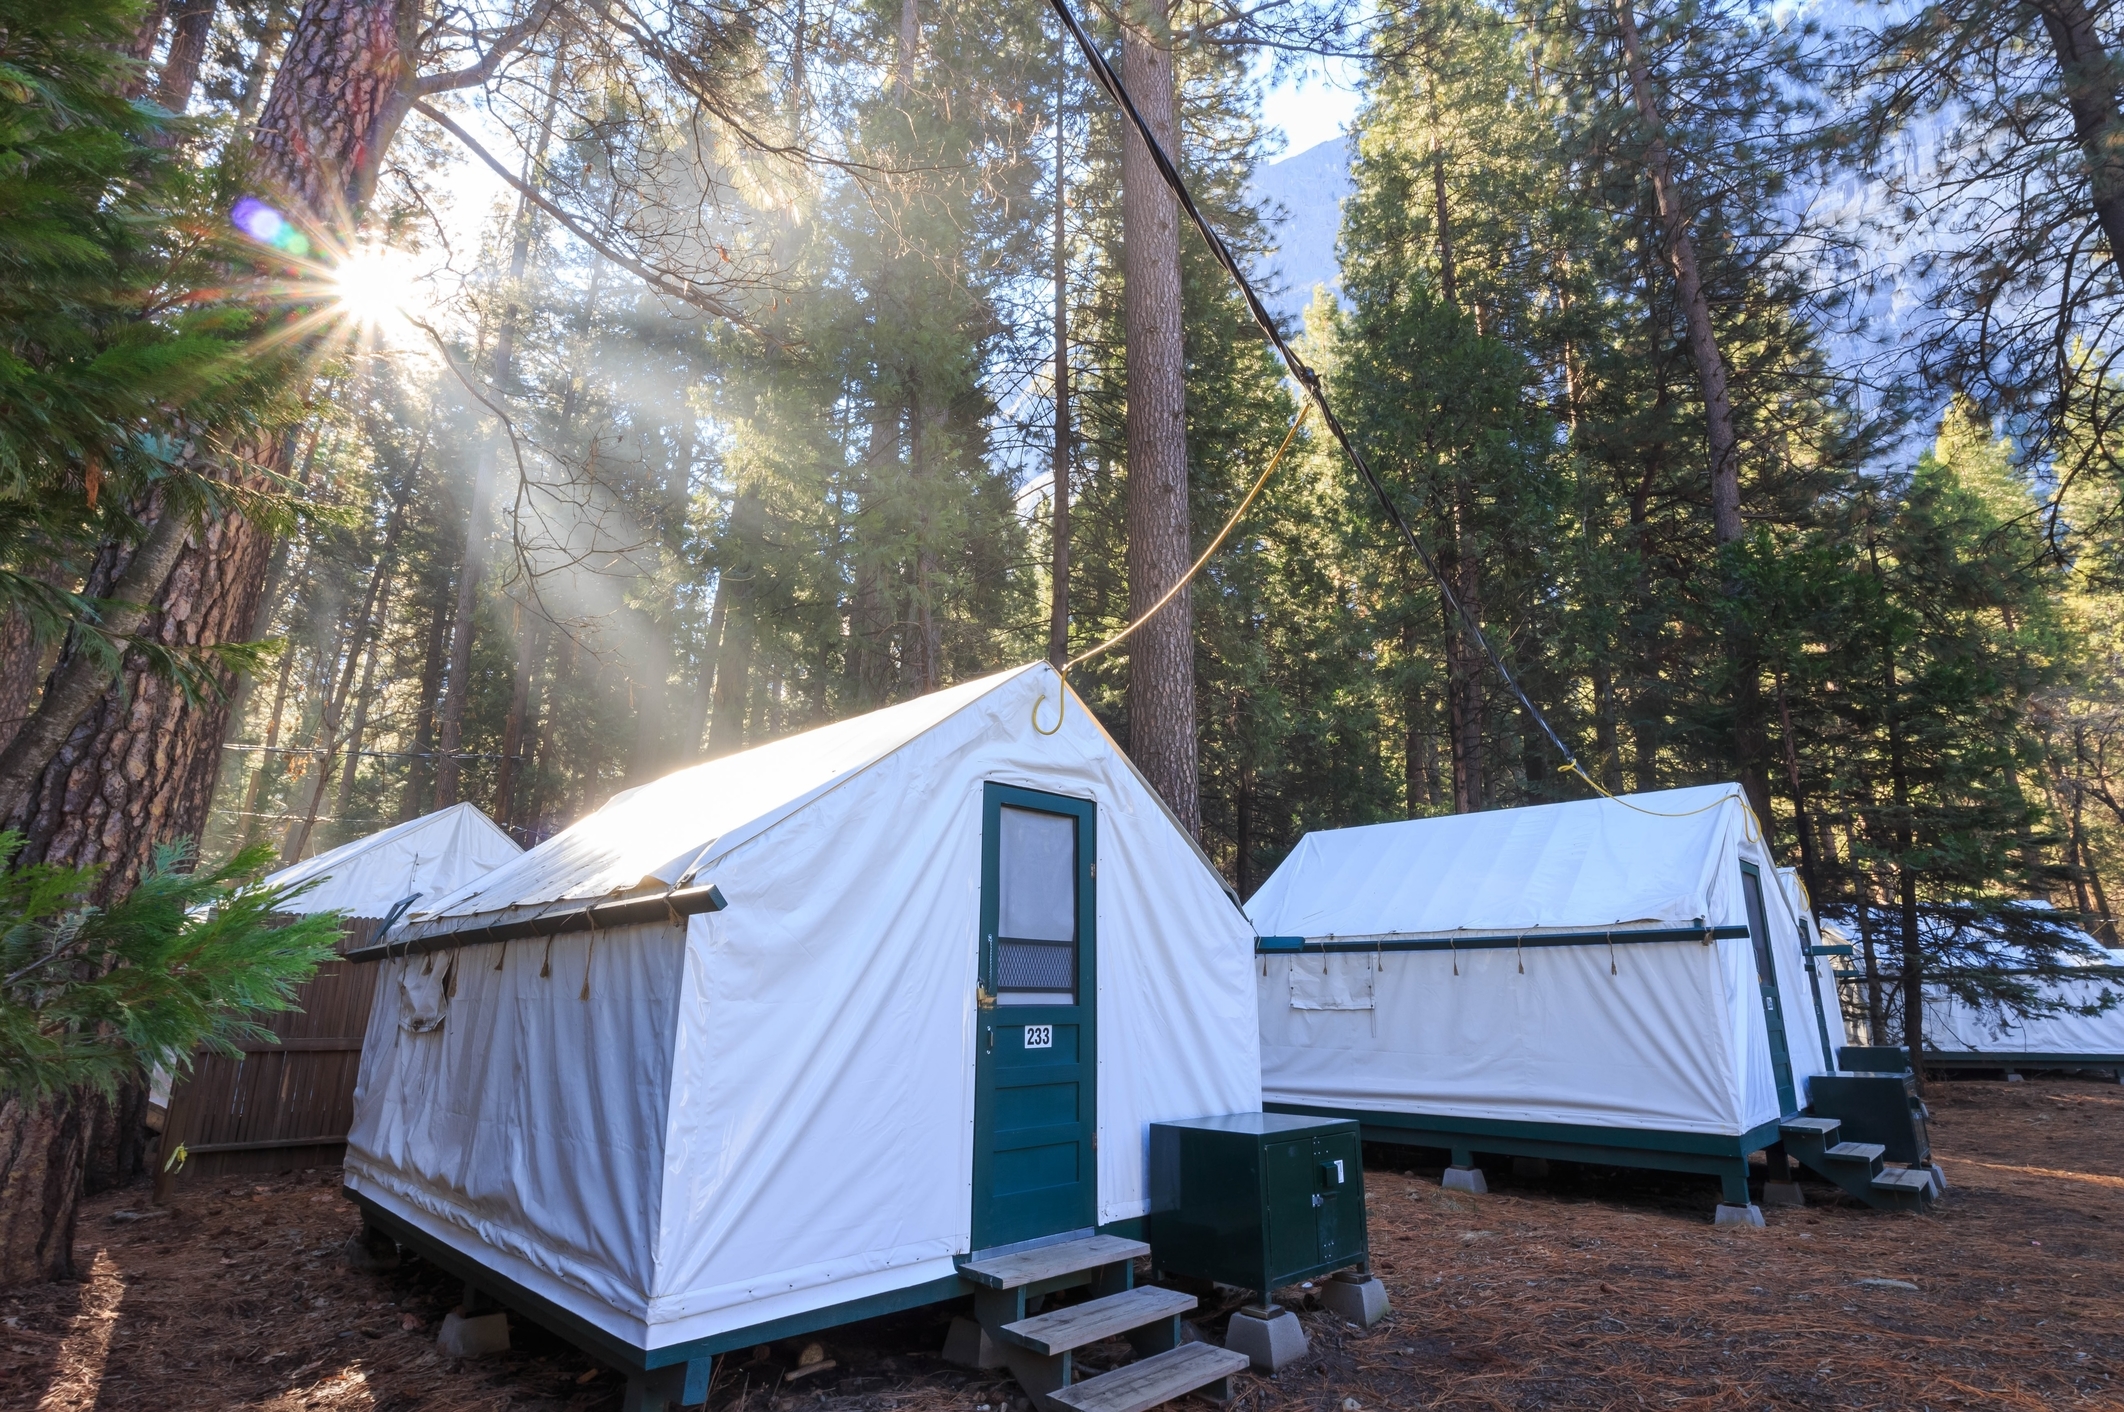 View of glamping tents in Half Dome Village, Yosemite